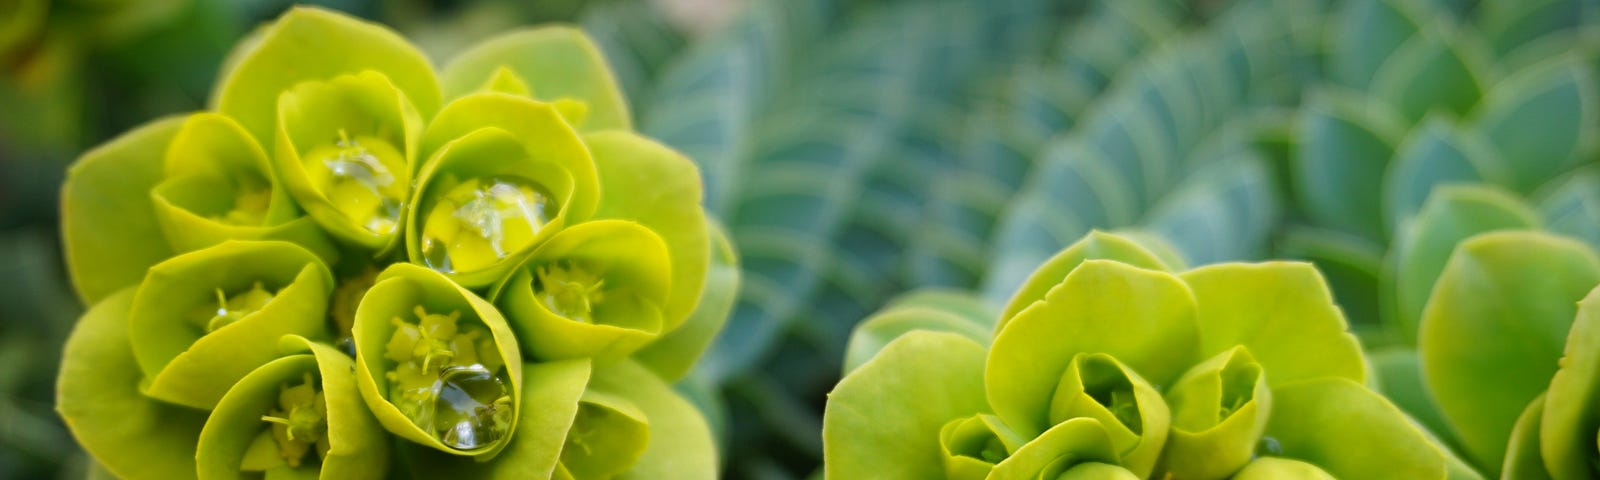 An image of lovely light-green sedum stonecrop flowers in a hazy background of dark-green foliage.